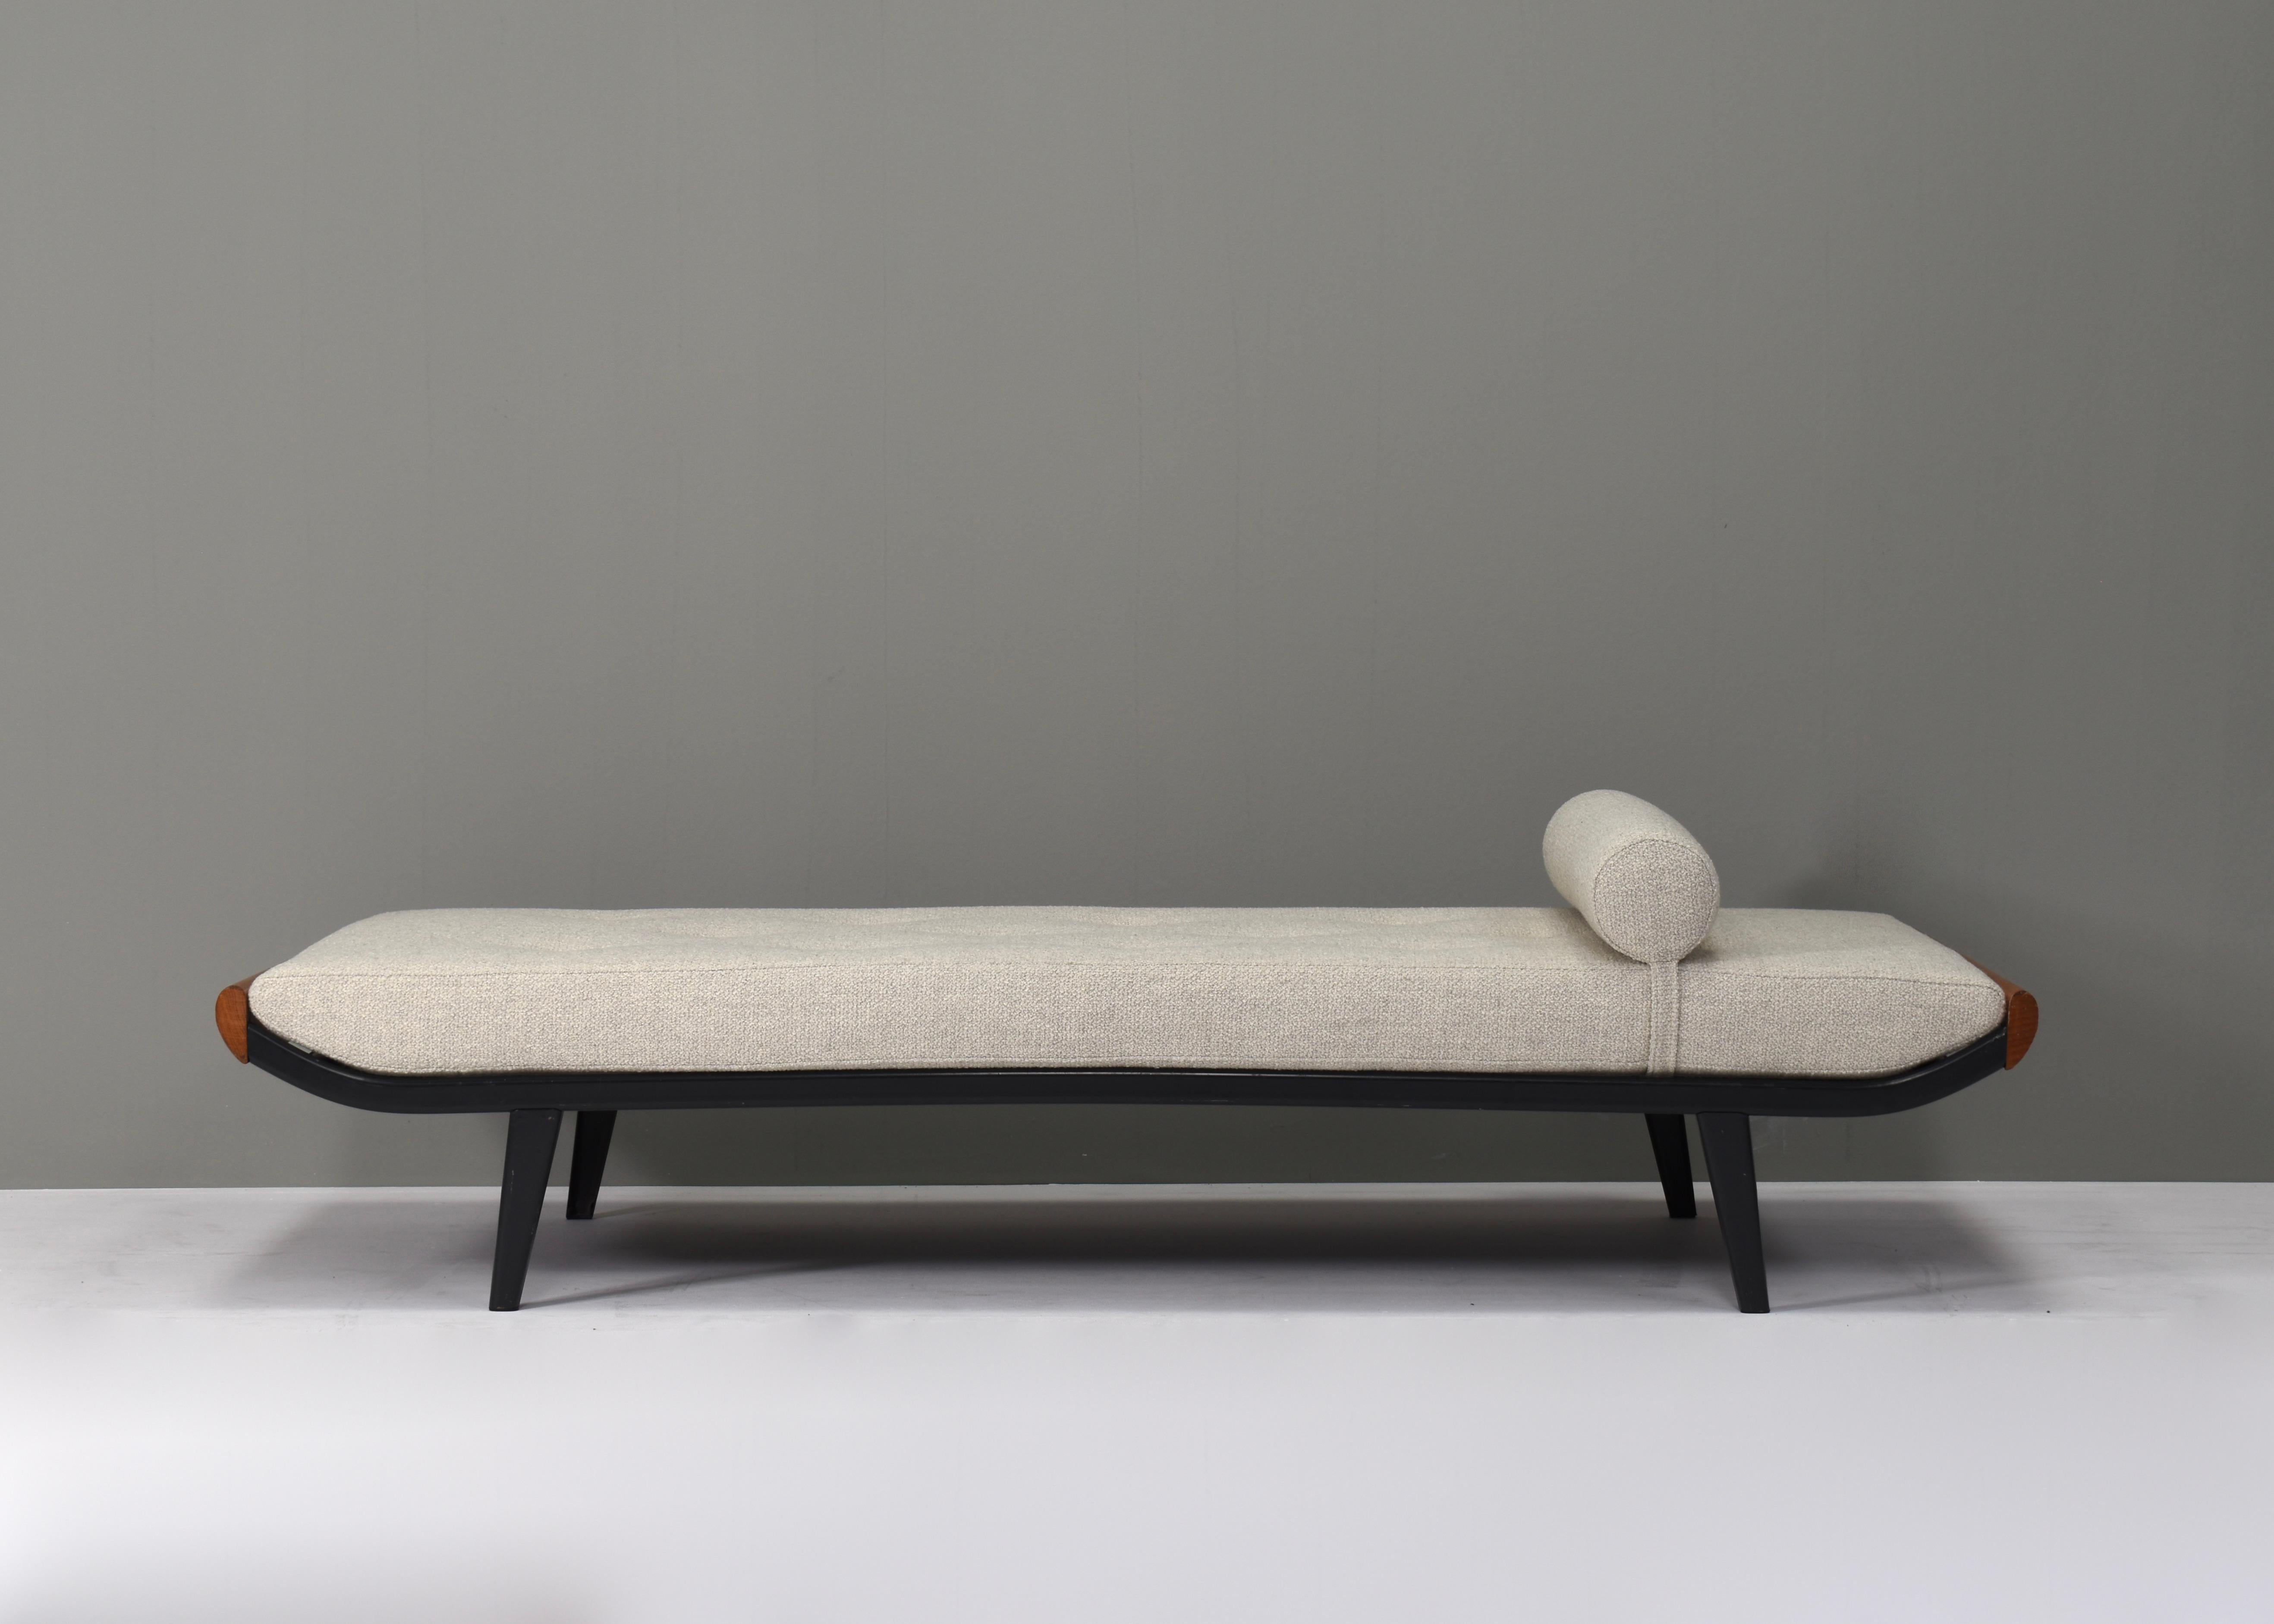 New upholstered daybed by Dick Cordemeijer for Auping, Netherlands – 1953.
The Cleopatra daybed has a new mattress and bouclé beige creme fabric by De Ploegstof model Monza.
In very good condition.
Designer: Dick Cordemeijer
Manufacturer: